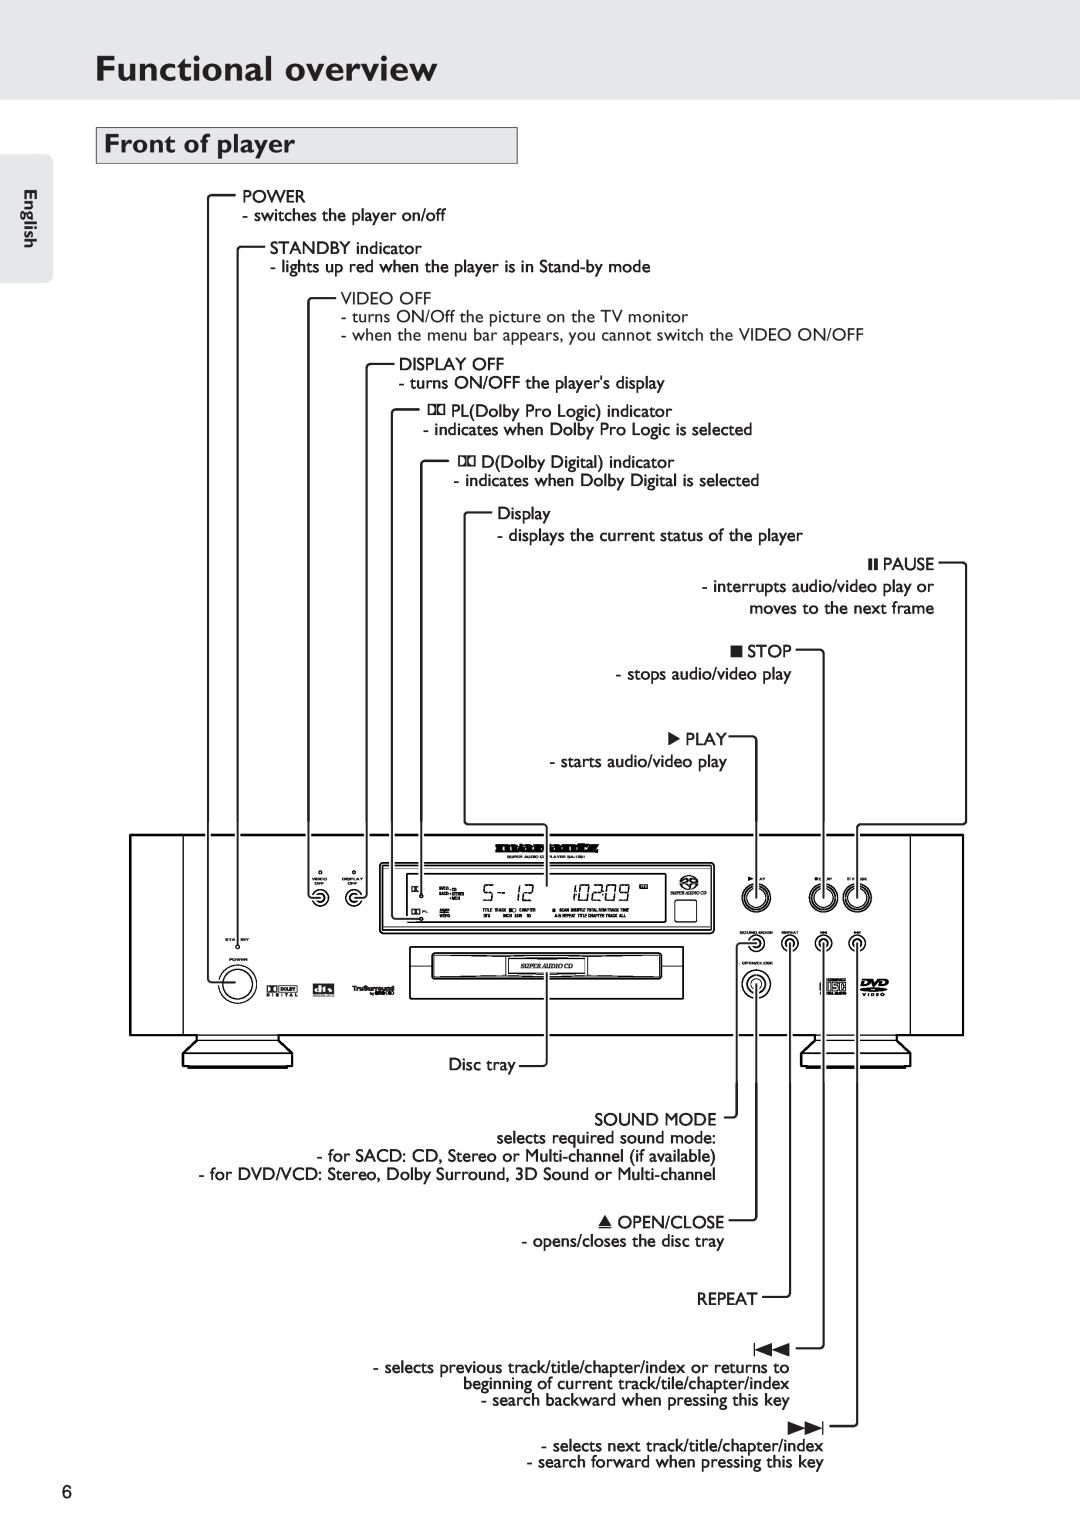 Marantz SA-12S1 manual Functional overview, Front of player, English 